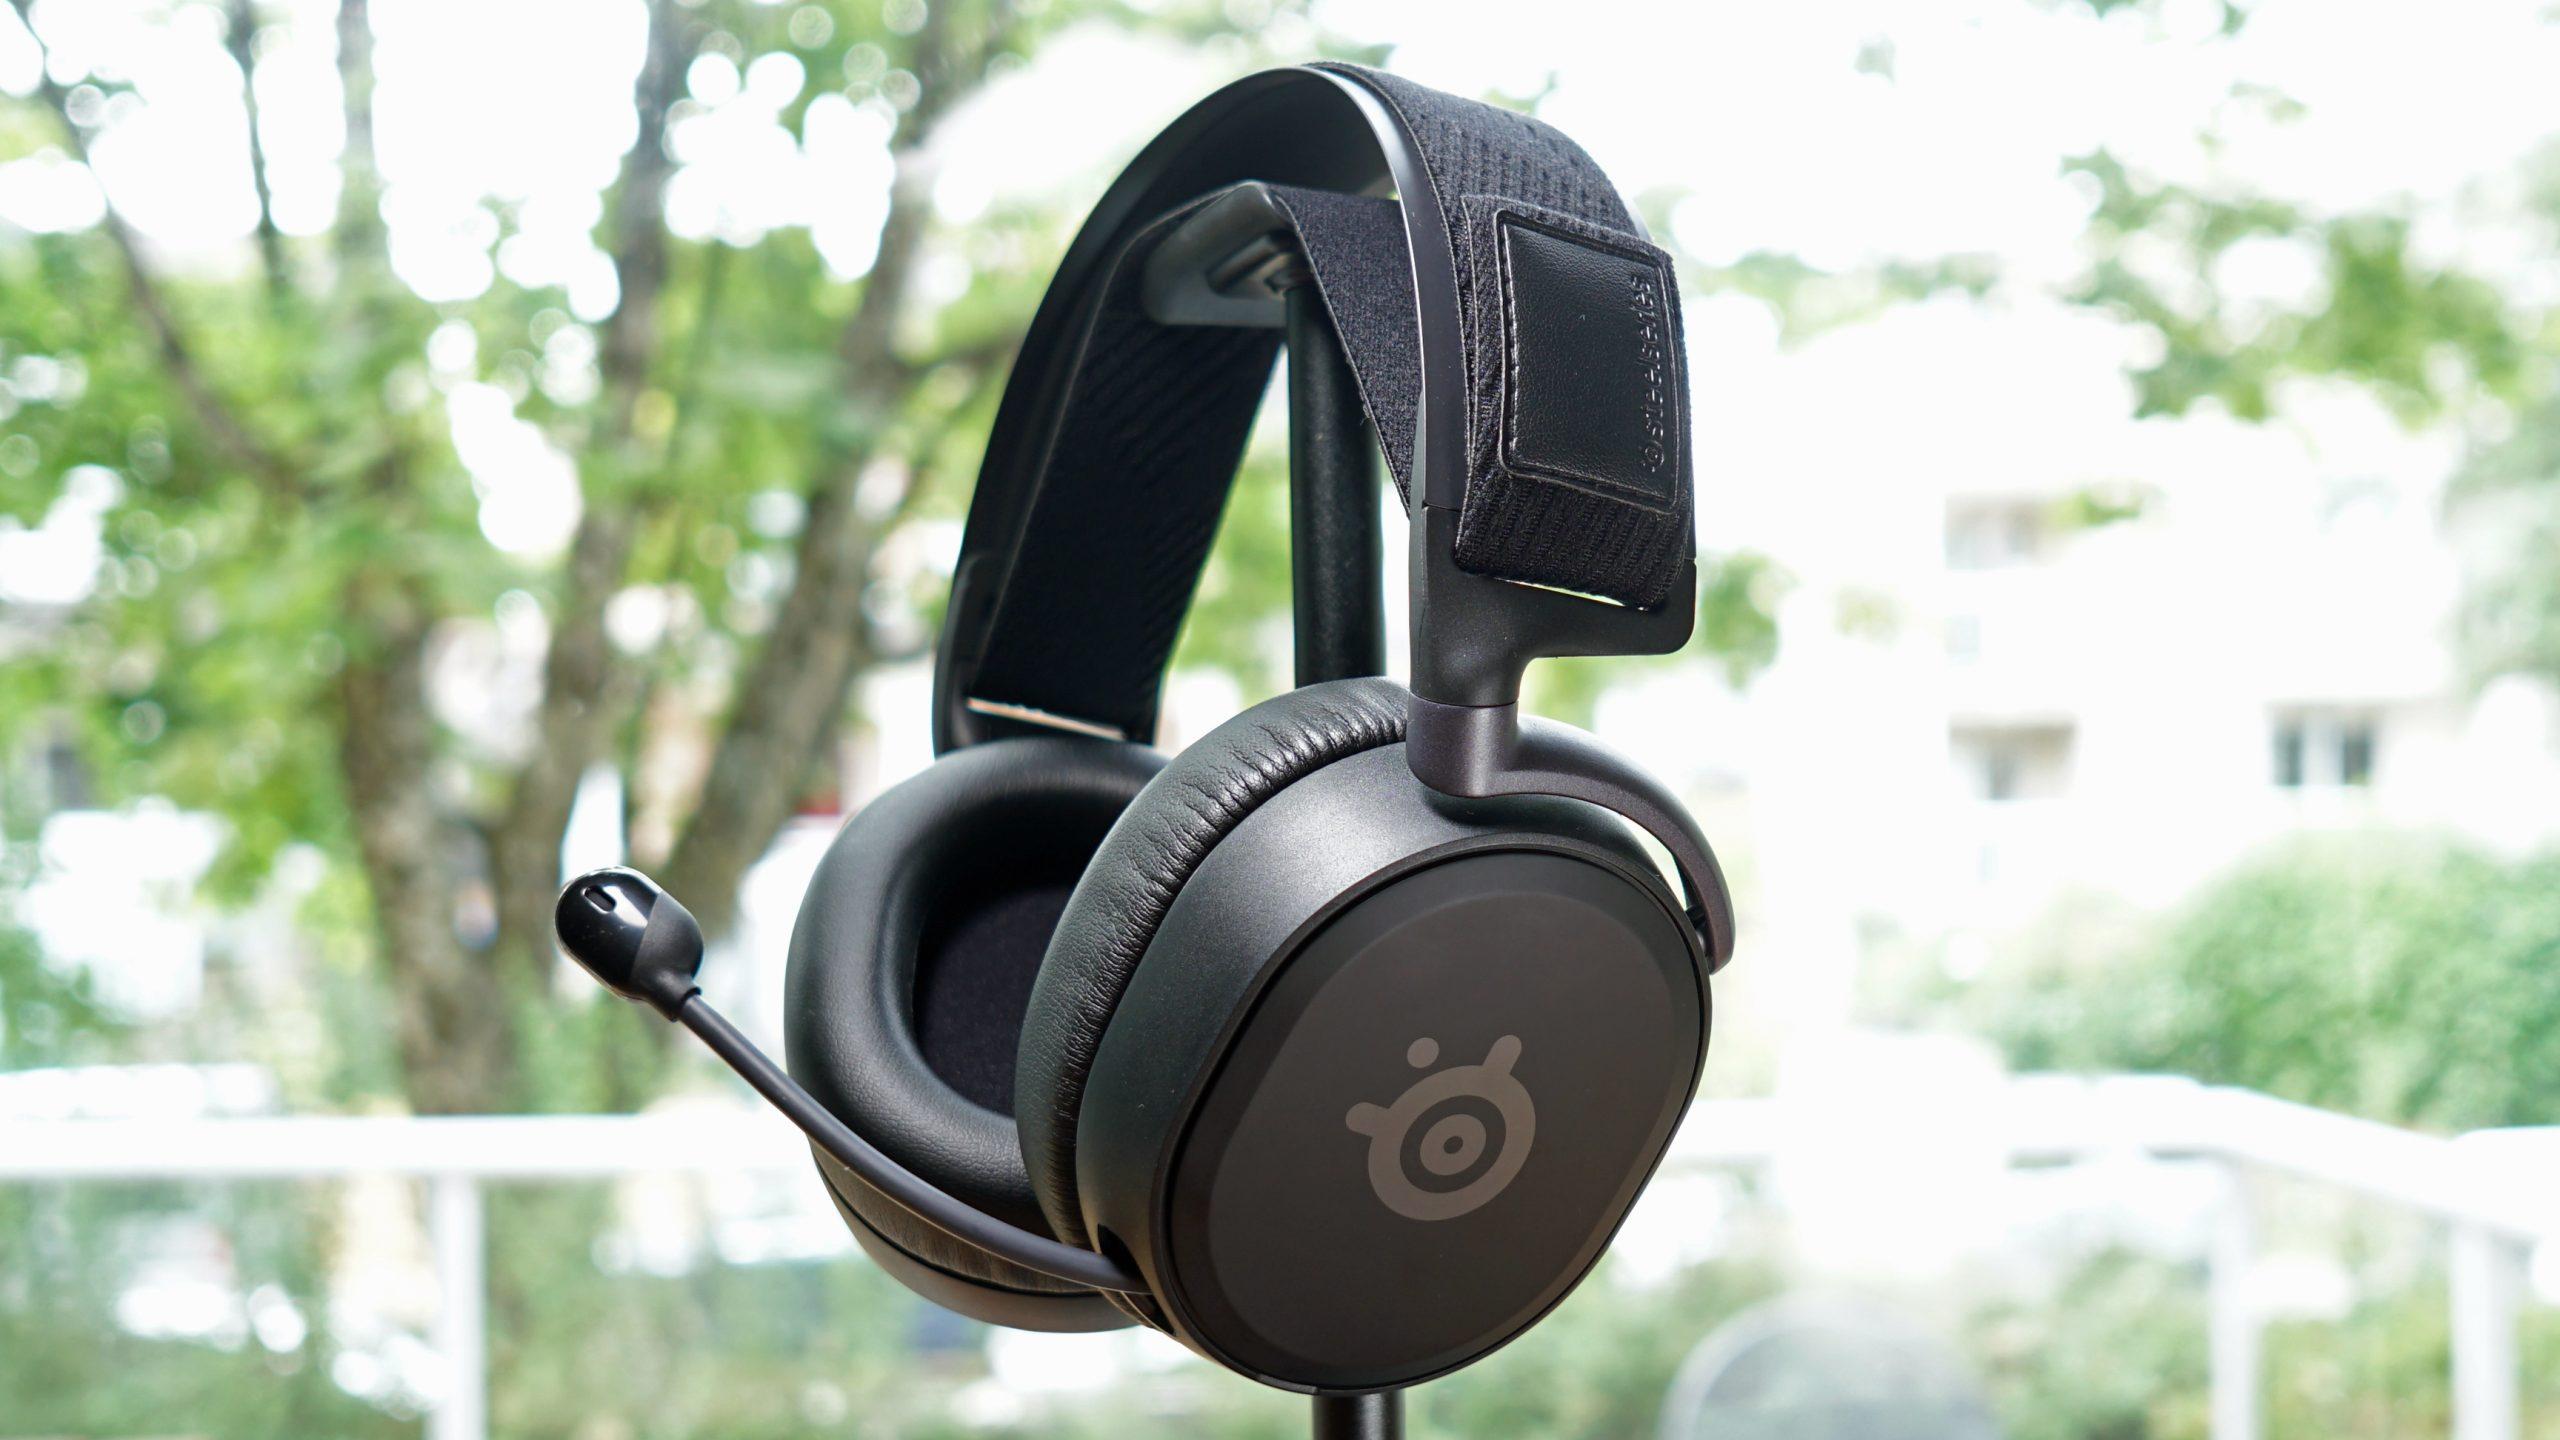 The SteelSeries Arctis Prime gaming headset sits on headphone stand in front of a window.